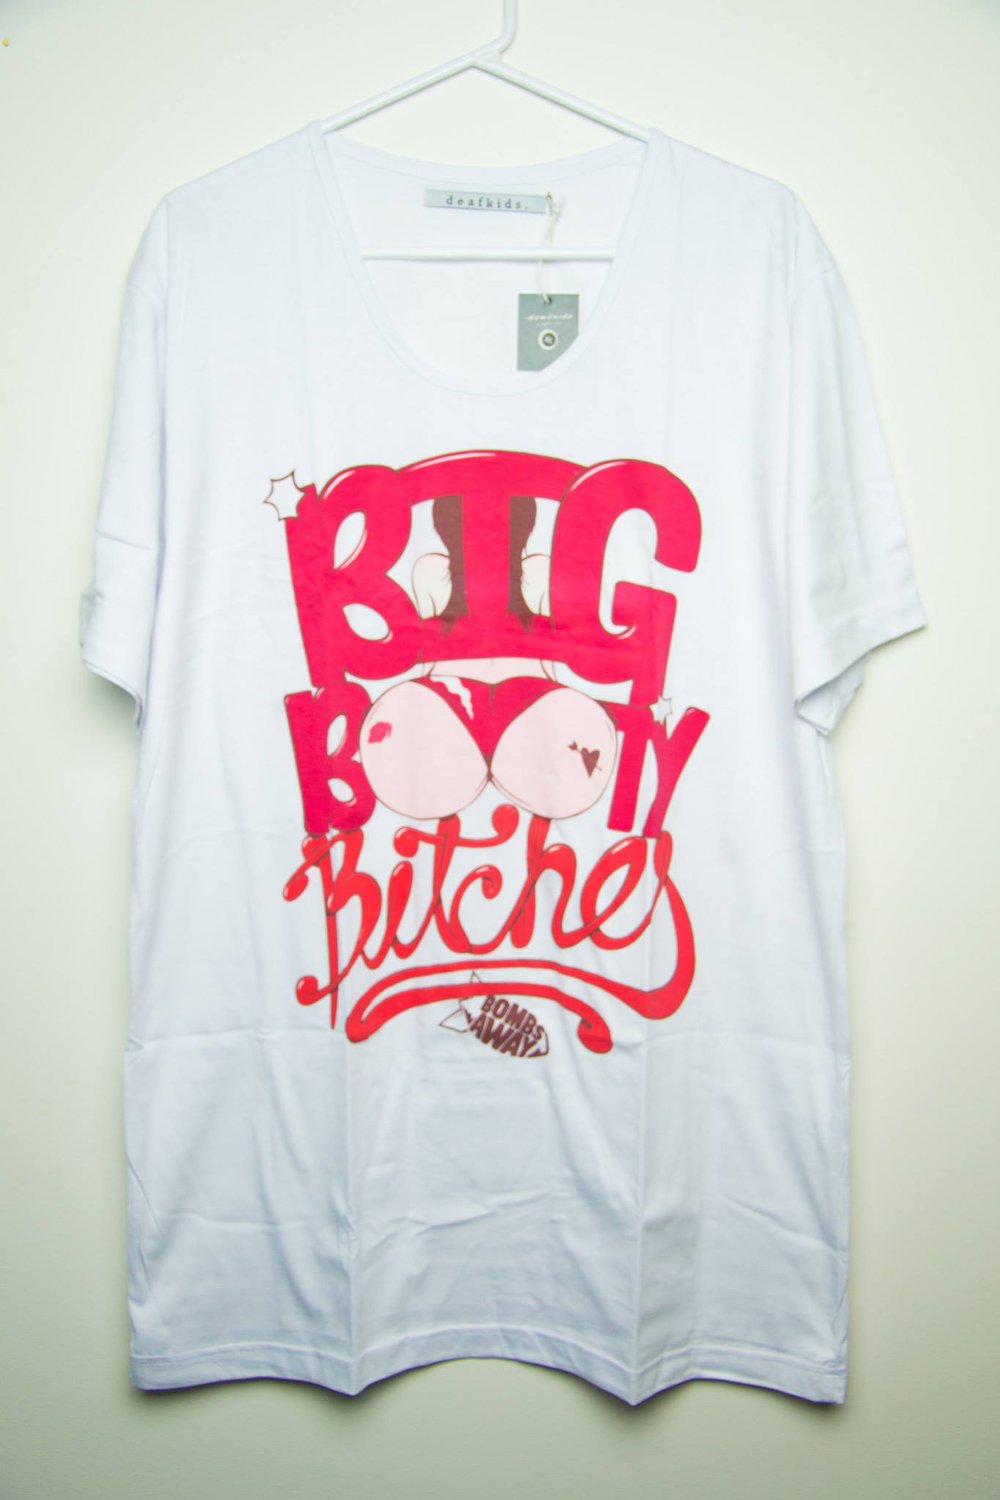 Image of Big Booty Bitches T-Shirt